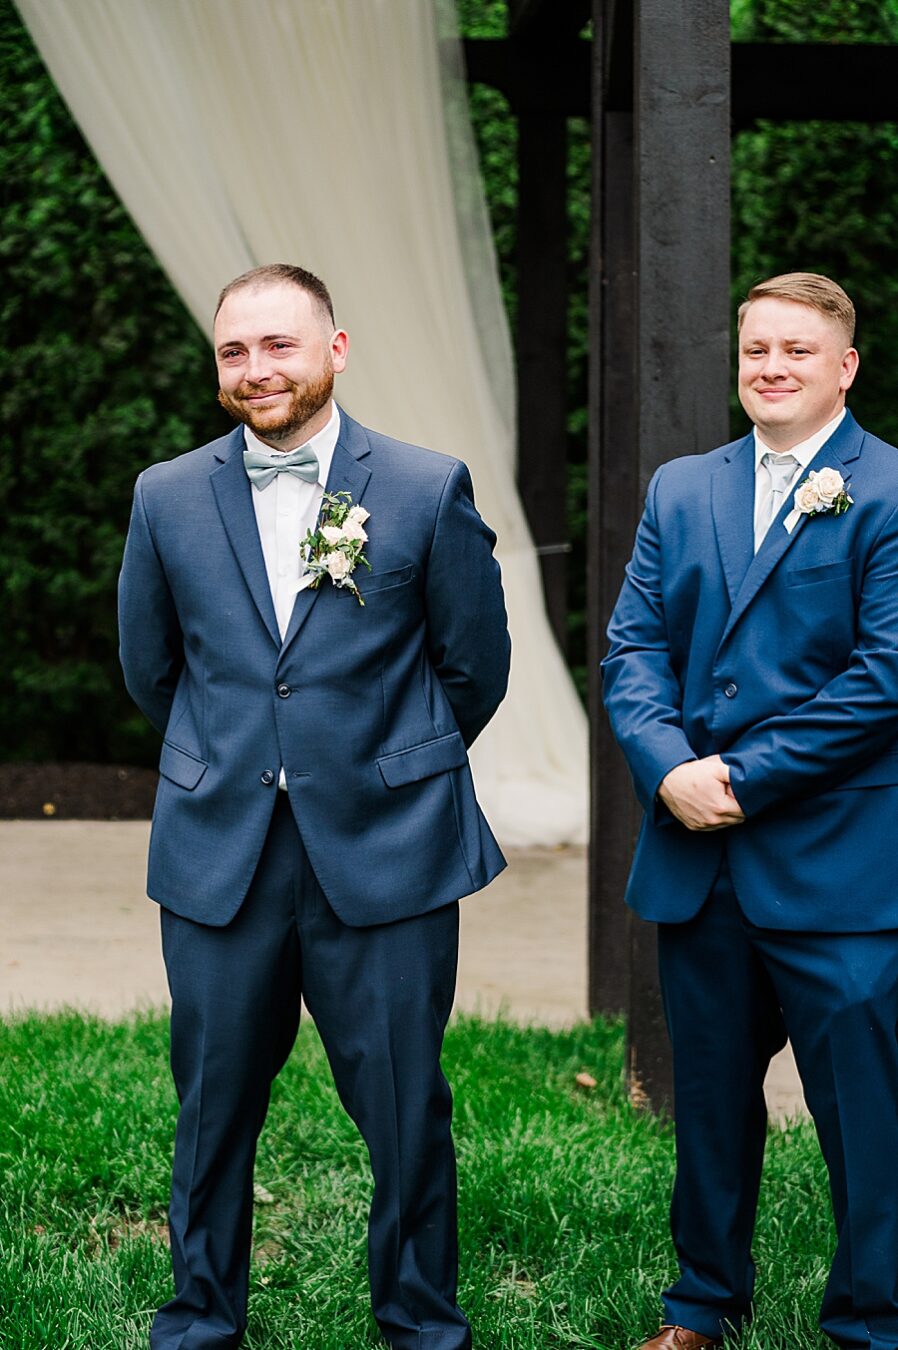 Groom smiling during ceremony at Wedding by Amanda May Photos